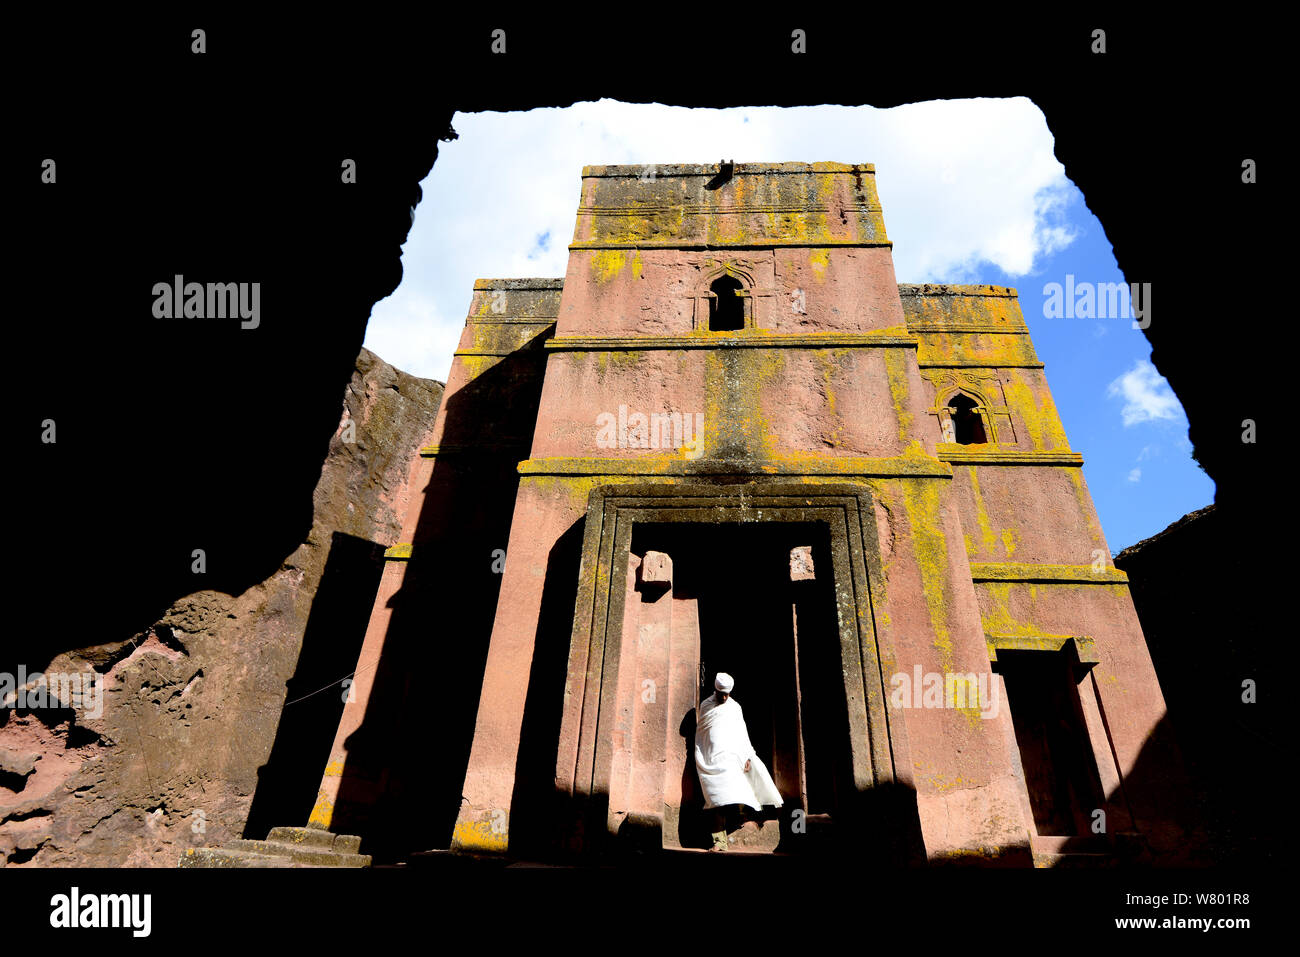 Priest in traditional clothing outside Bet Giyorgis Church, a church carved out of solid tufa rock, Lalibela. UNESCO World Heritage Site. Ethiopia, December 2014. Stock Photo